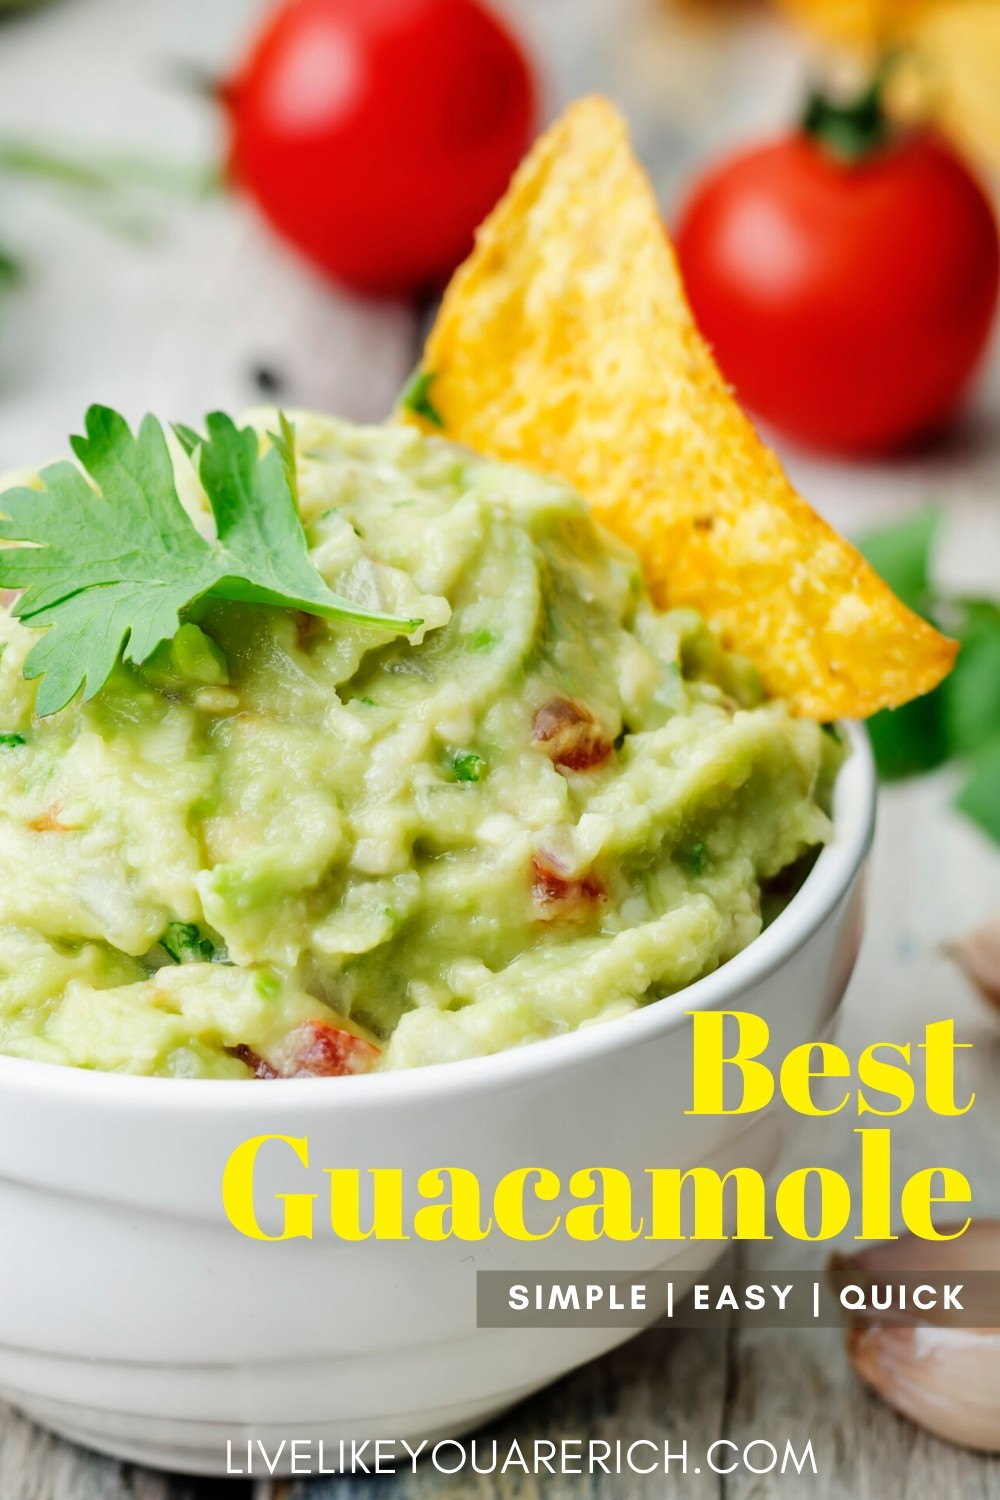 I’ve made this guacamole recipe countless times since discovering this easy and simple recipe. I’ve made it for my family, extended family, and for parties. Everyone has always said that it is either ‘super good’ or the ‘BEST guacamole’ they’ve had. 